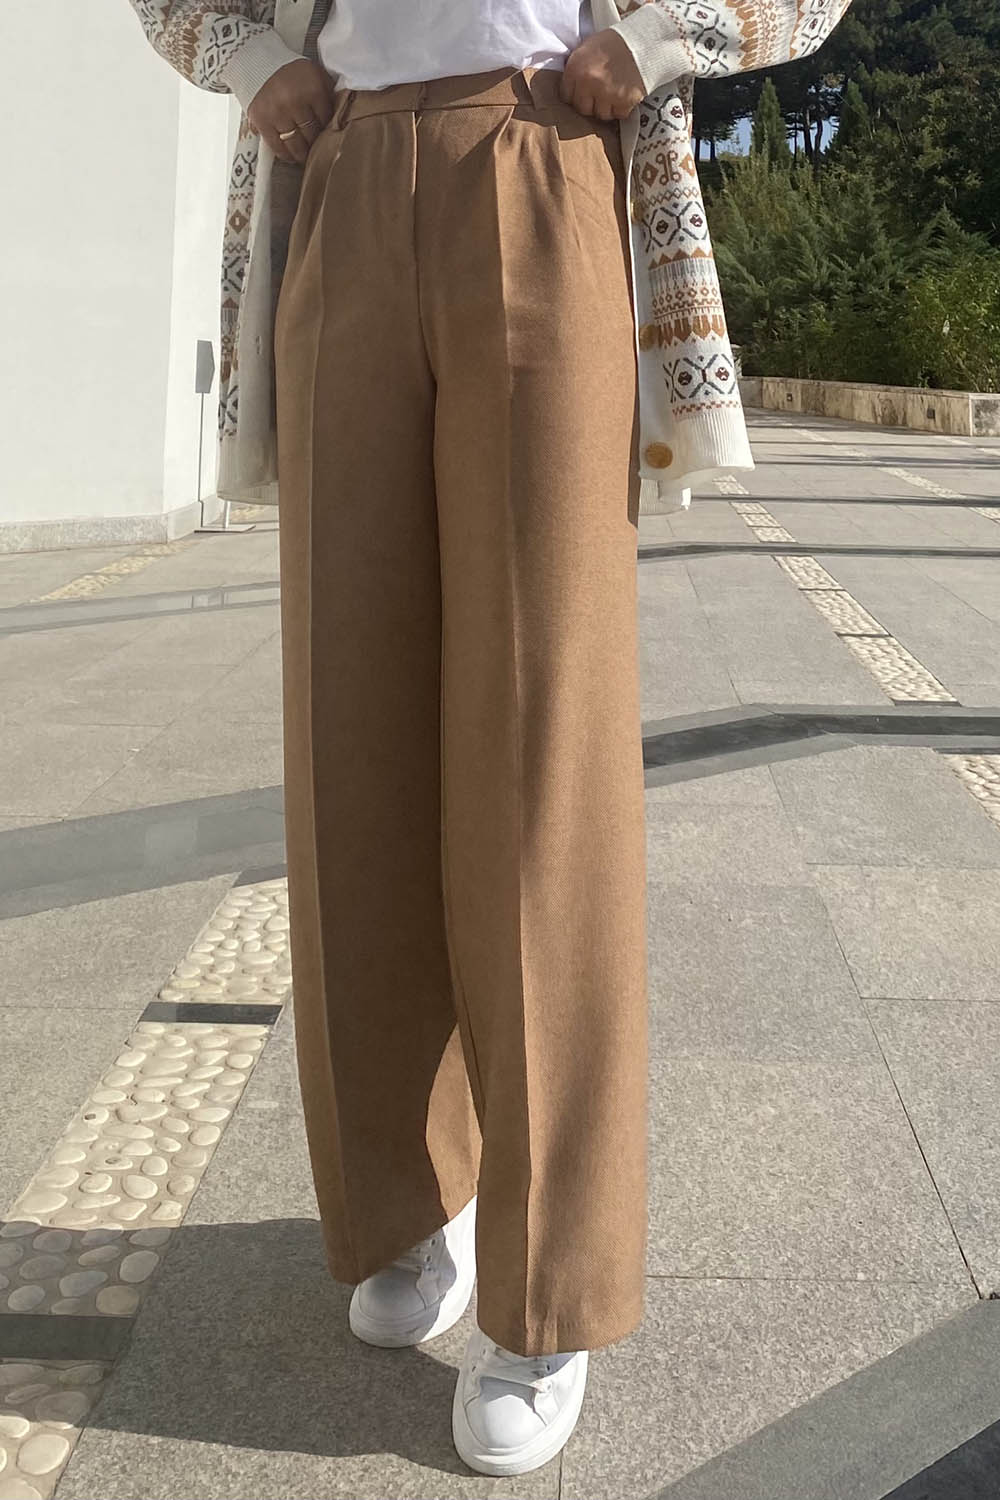 Happy Monday! Scored these esker wide leg pants in mojave tan (12) for $19  at the outlet 😎 really enjoying this fit! Also wearing kits mock neck tank  (12) AEJ Dark Terracotta (